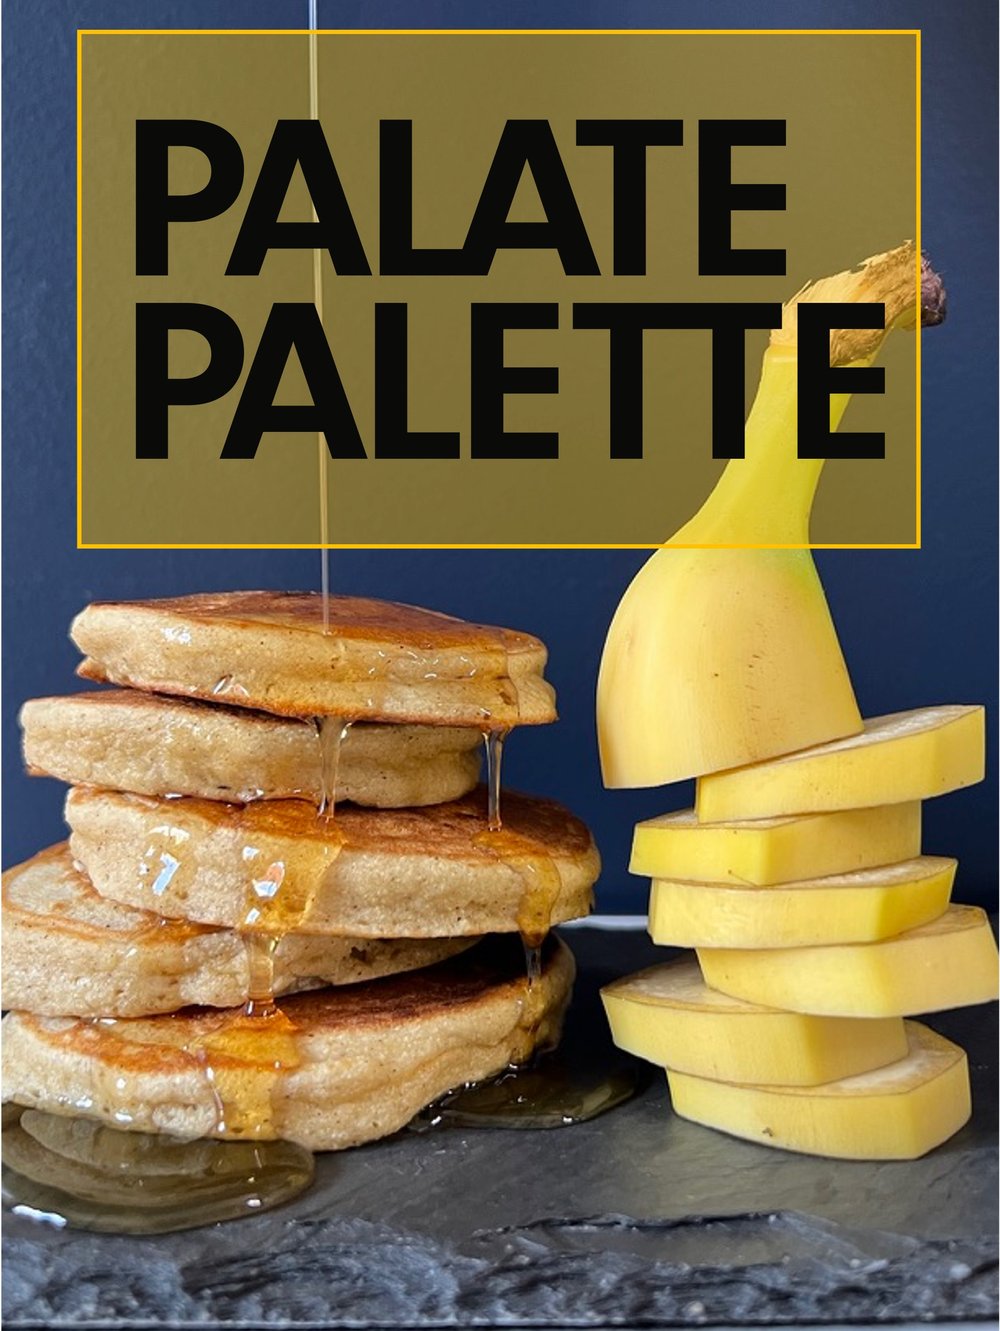 On 'Palate,' 'Pallet,' and 'Palette